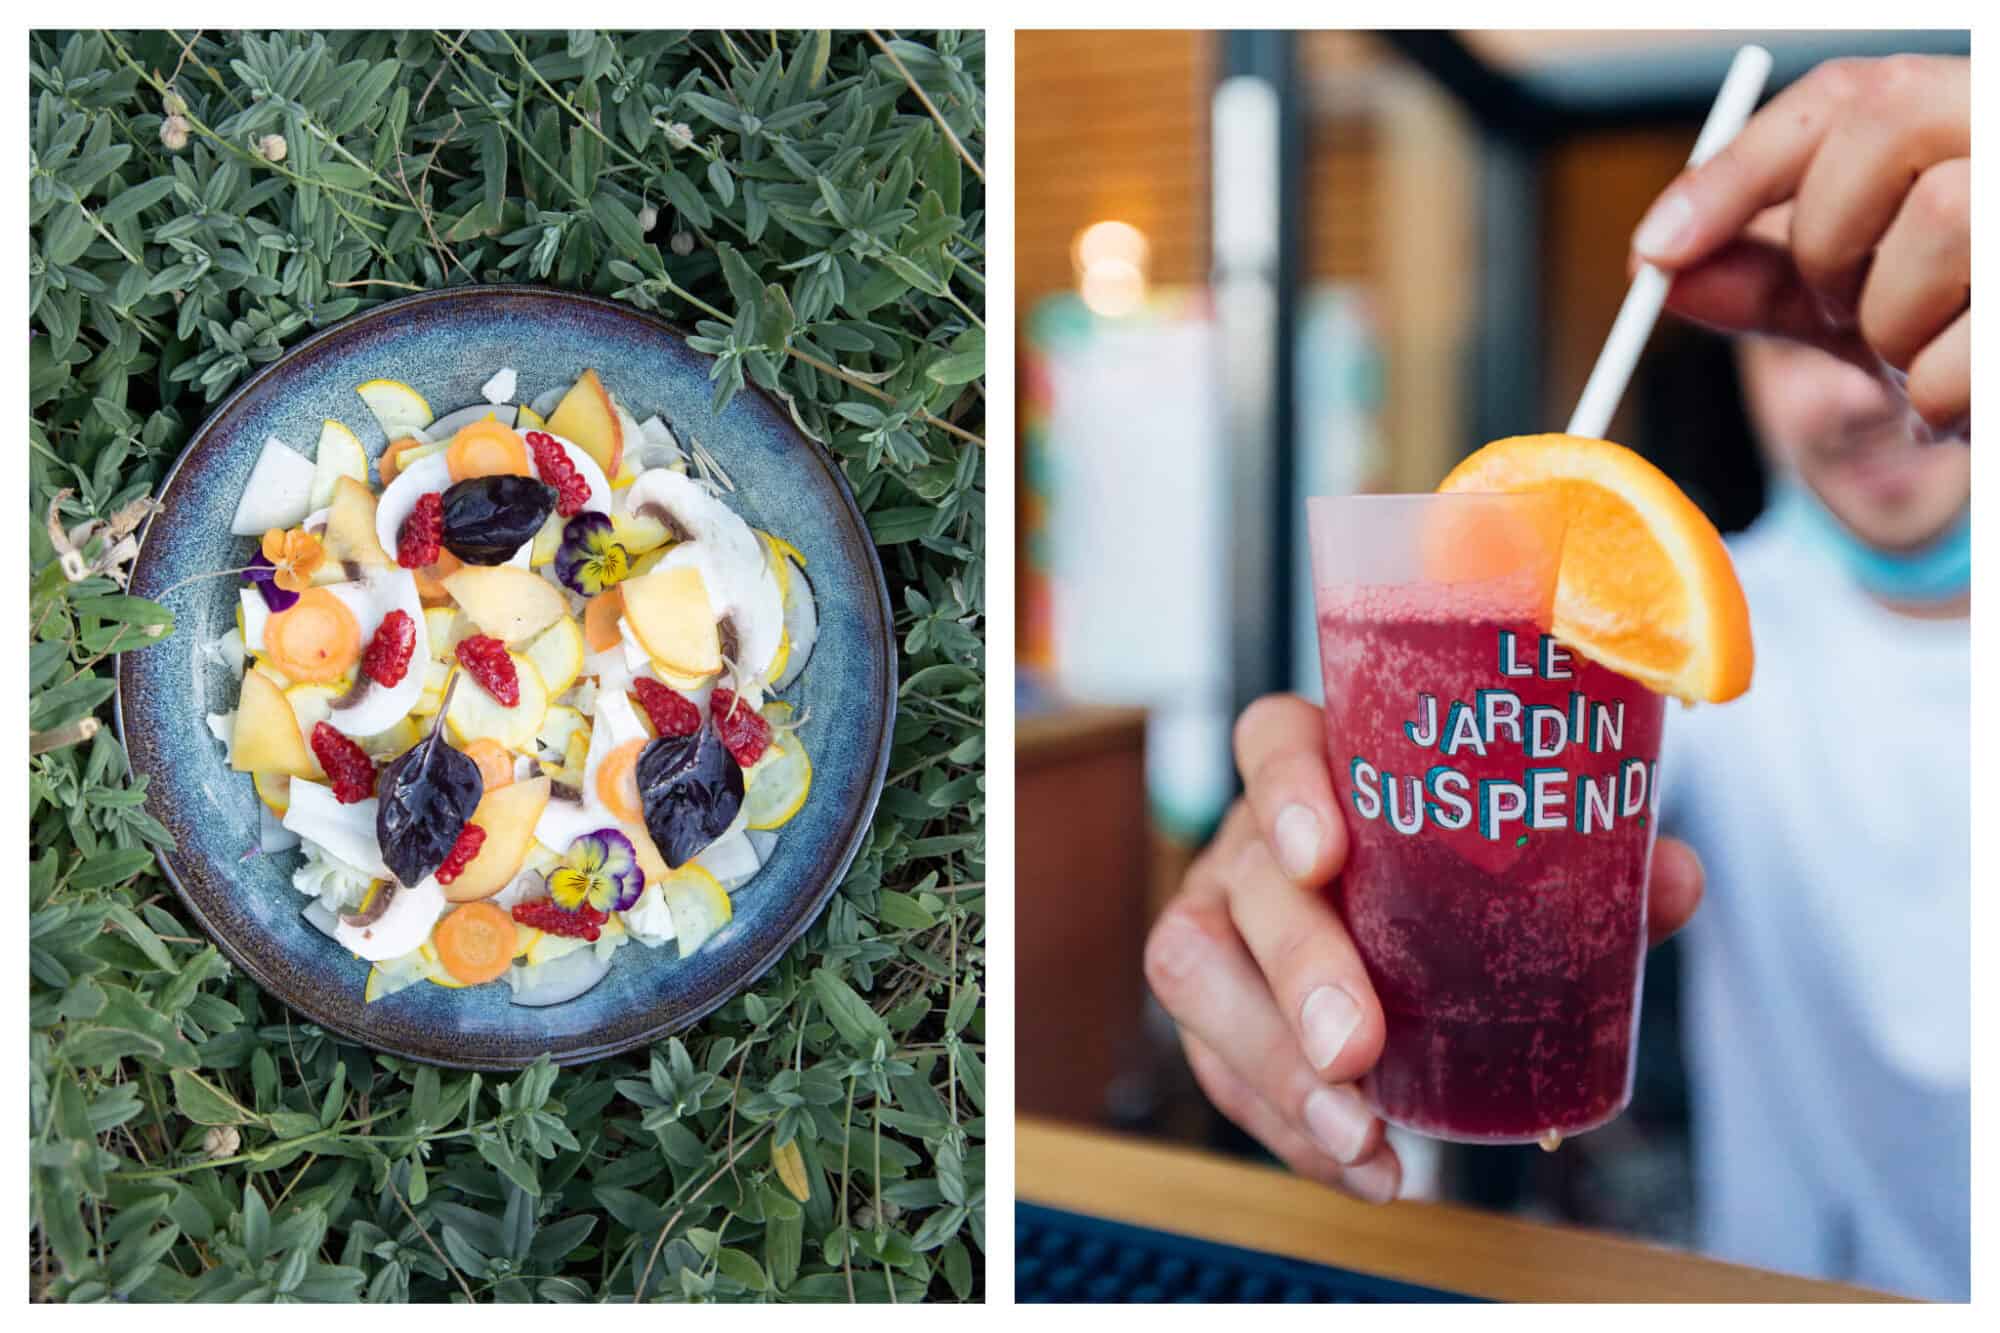 Left: a salad on a blue ceramic plate sitting on some greenery. The salad is colorful, with orange, yellow, red and purple. Right: a red cocktail in a plastic cup with a slice of orange and a straw, held by the bartender. The cup has the words Le Jardin Suspendu on it. 